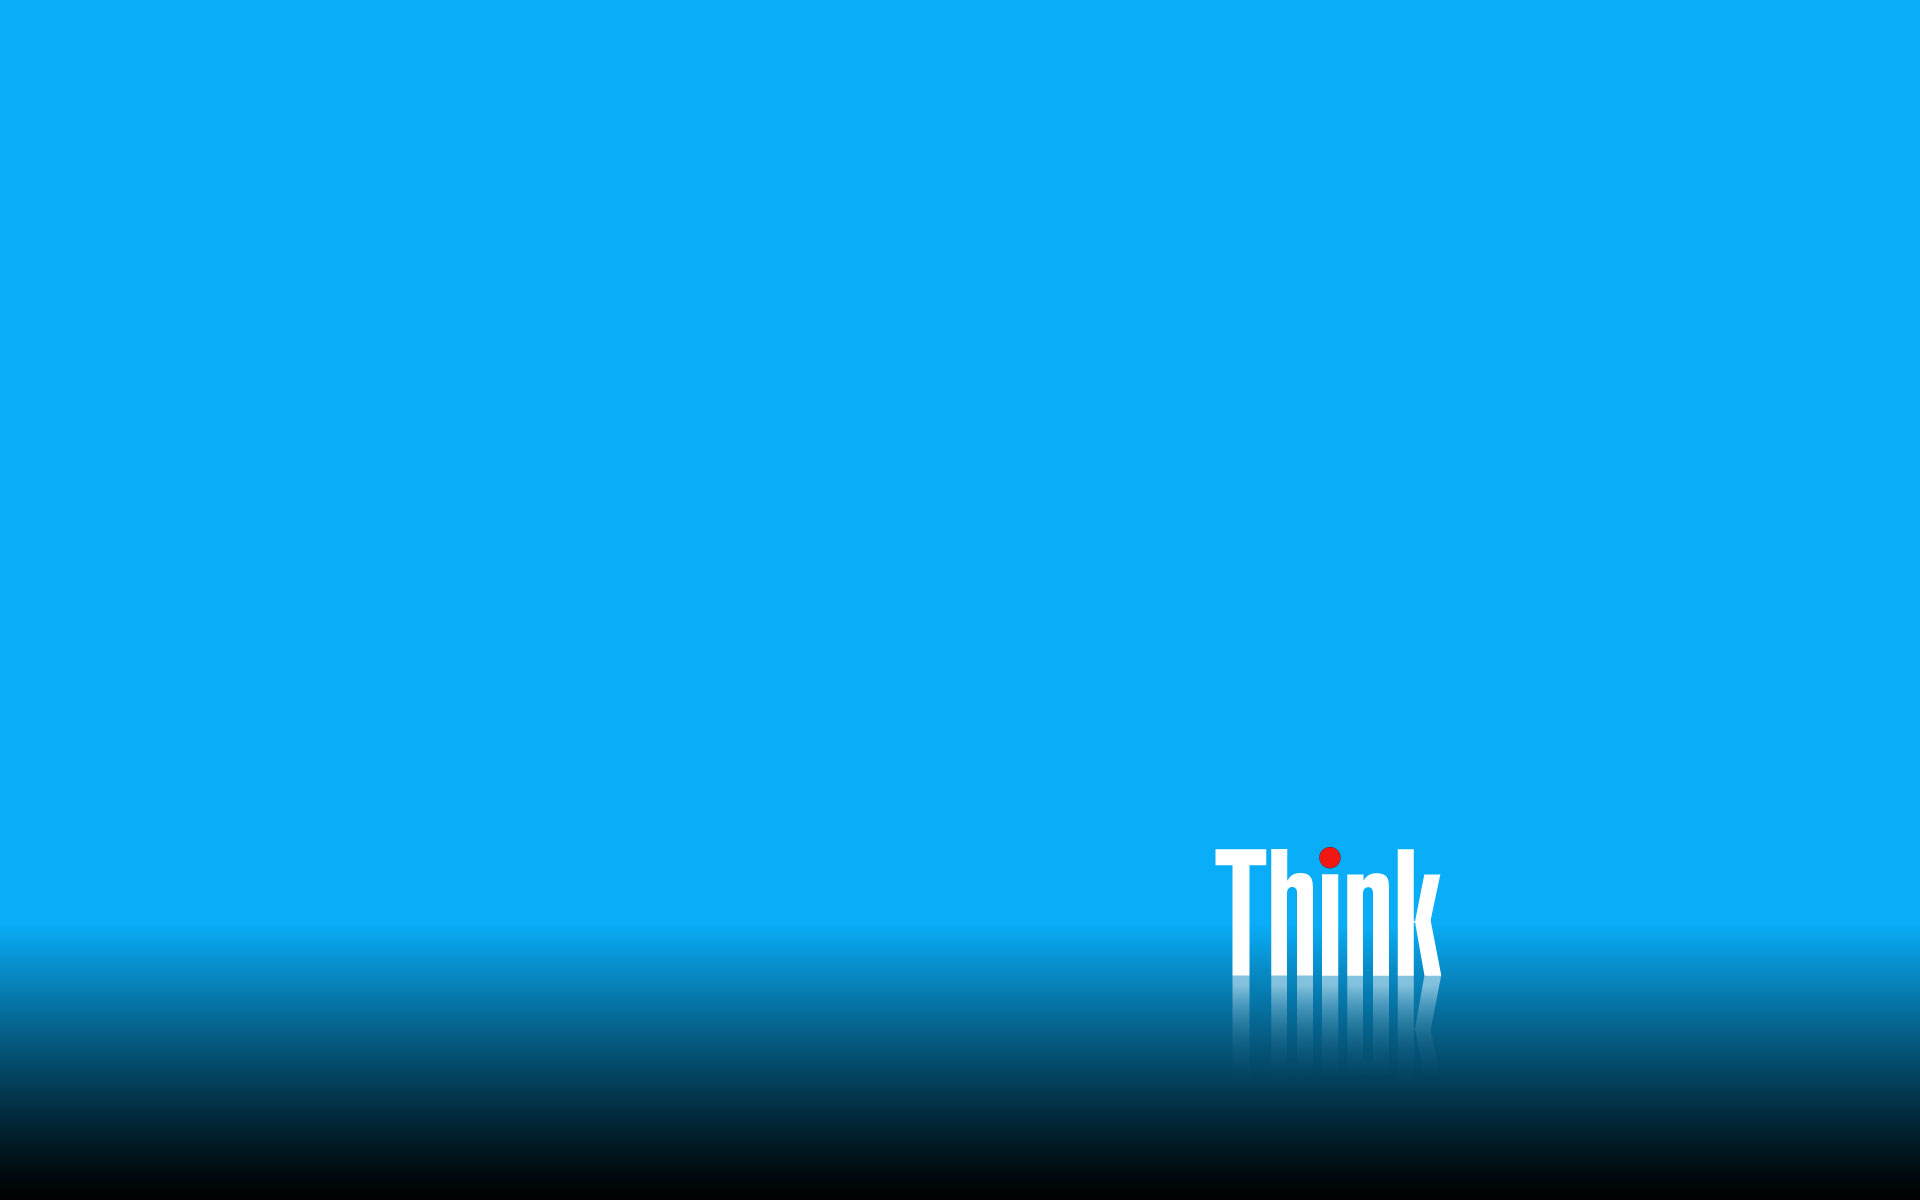 Free Download 19x10 Think Blue Desktop Pc And Mac Wallpaper 19x10 For Your Desktop Mobile Tablet Explore 49 Lenovo Wallpaper Theme Lenovo Wallpaper Windows 7 Lenovo Windows 8 Wallpaper Lenovo Thinkpad Original Wallpapers